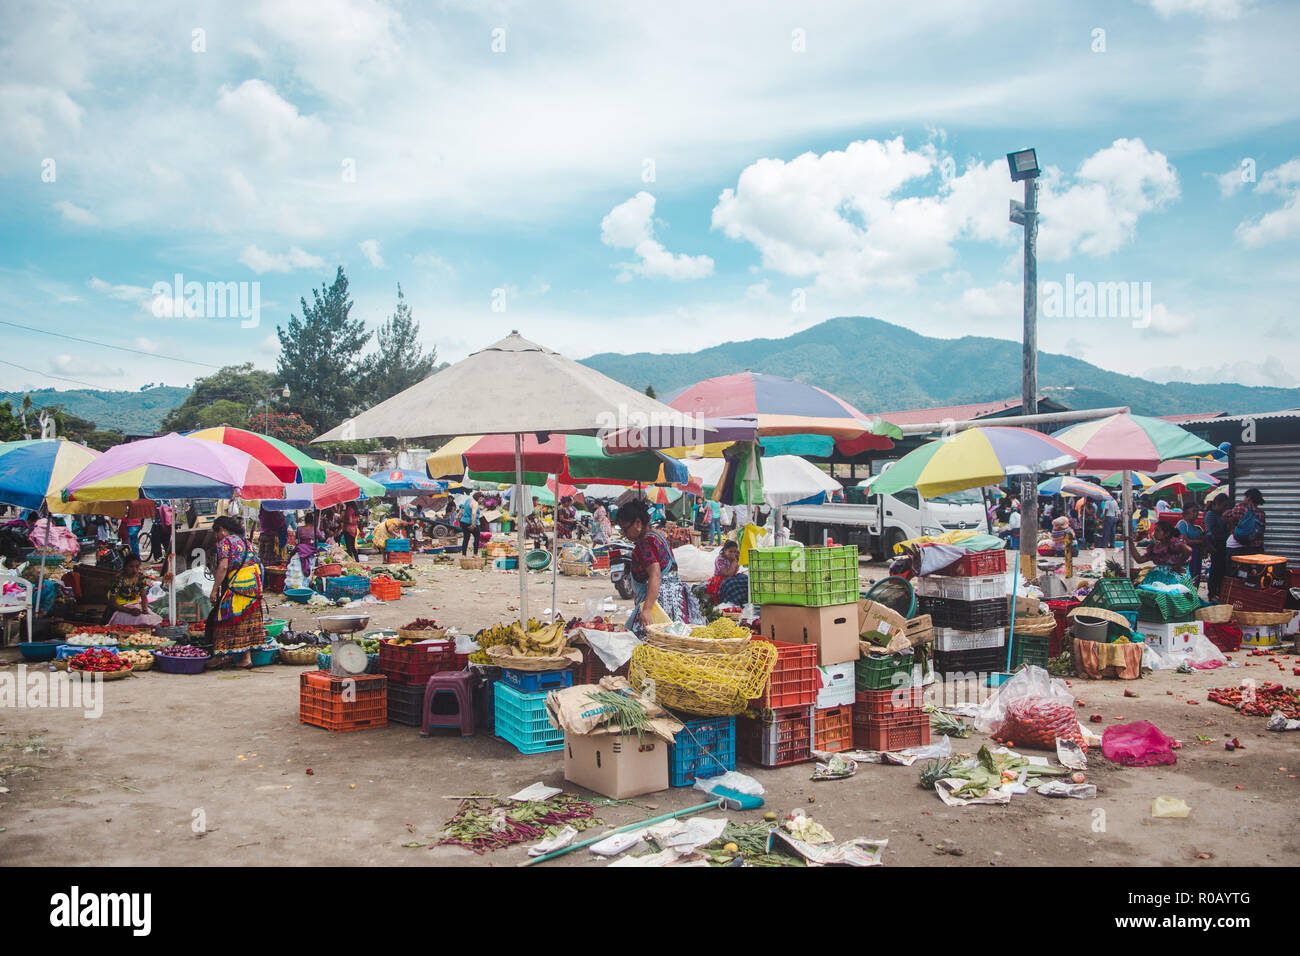 Vibrant food market stalls laid out on the floor by women in traditional Mayan dress under colorful parasol umbrellas in Antigua, Guatemala Stock Photo